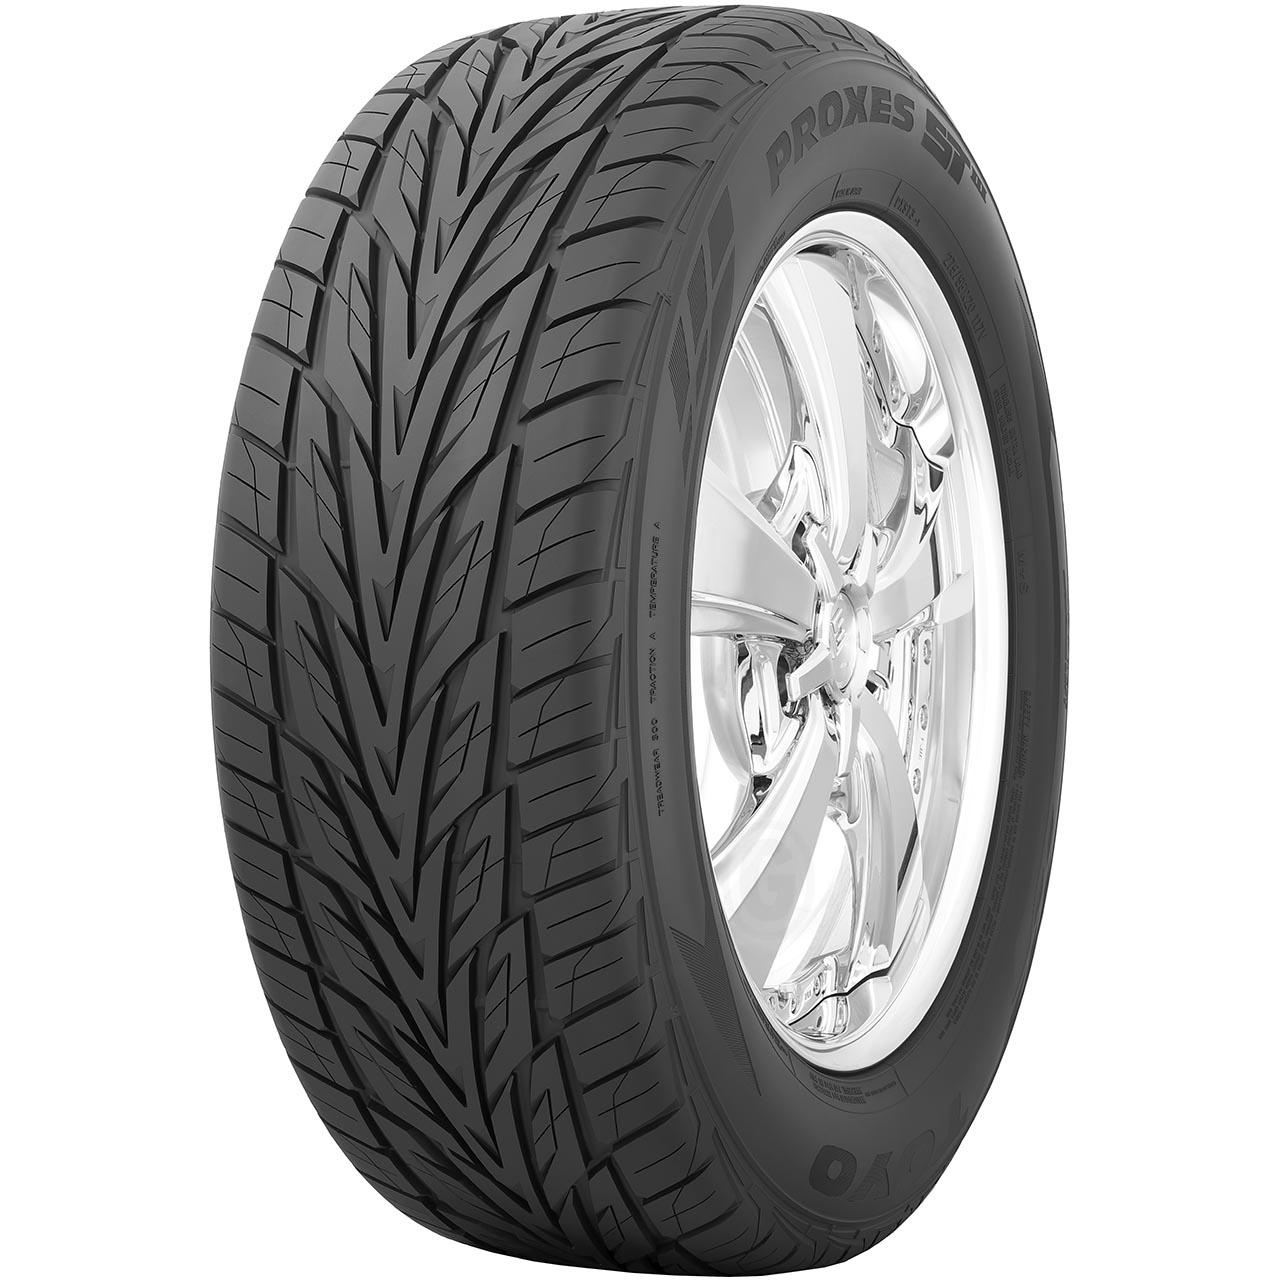 Toyo Proxes ST 3 245/60R18 105V